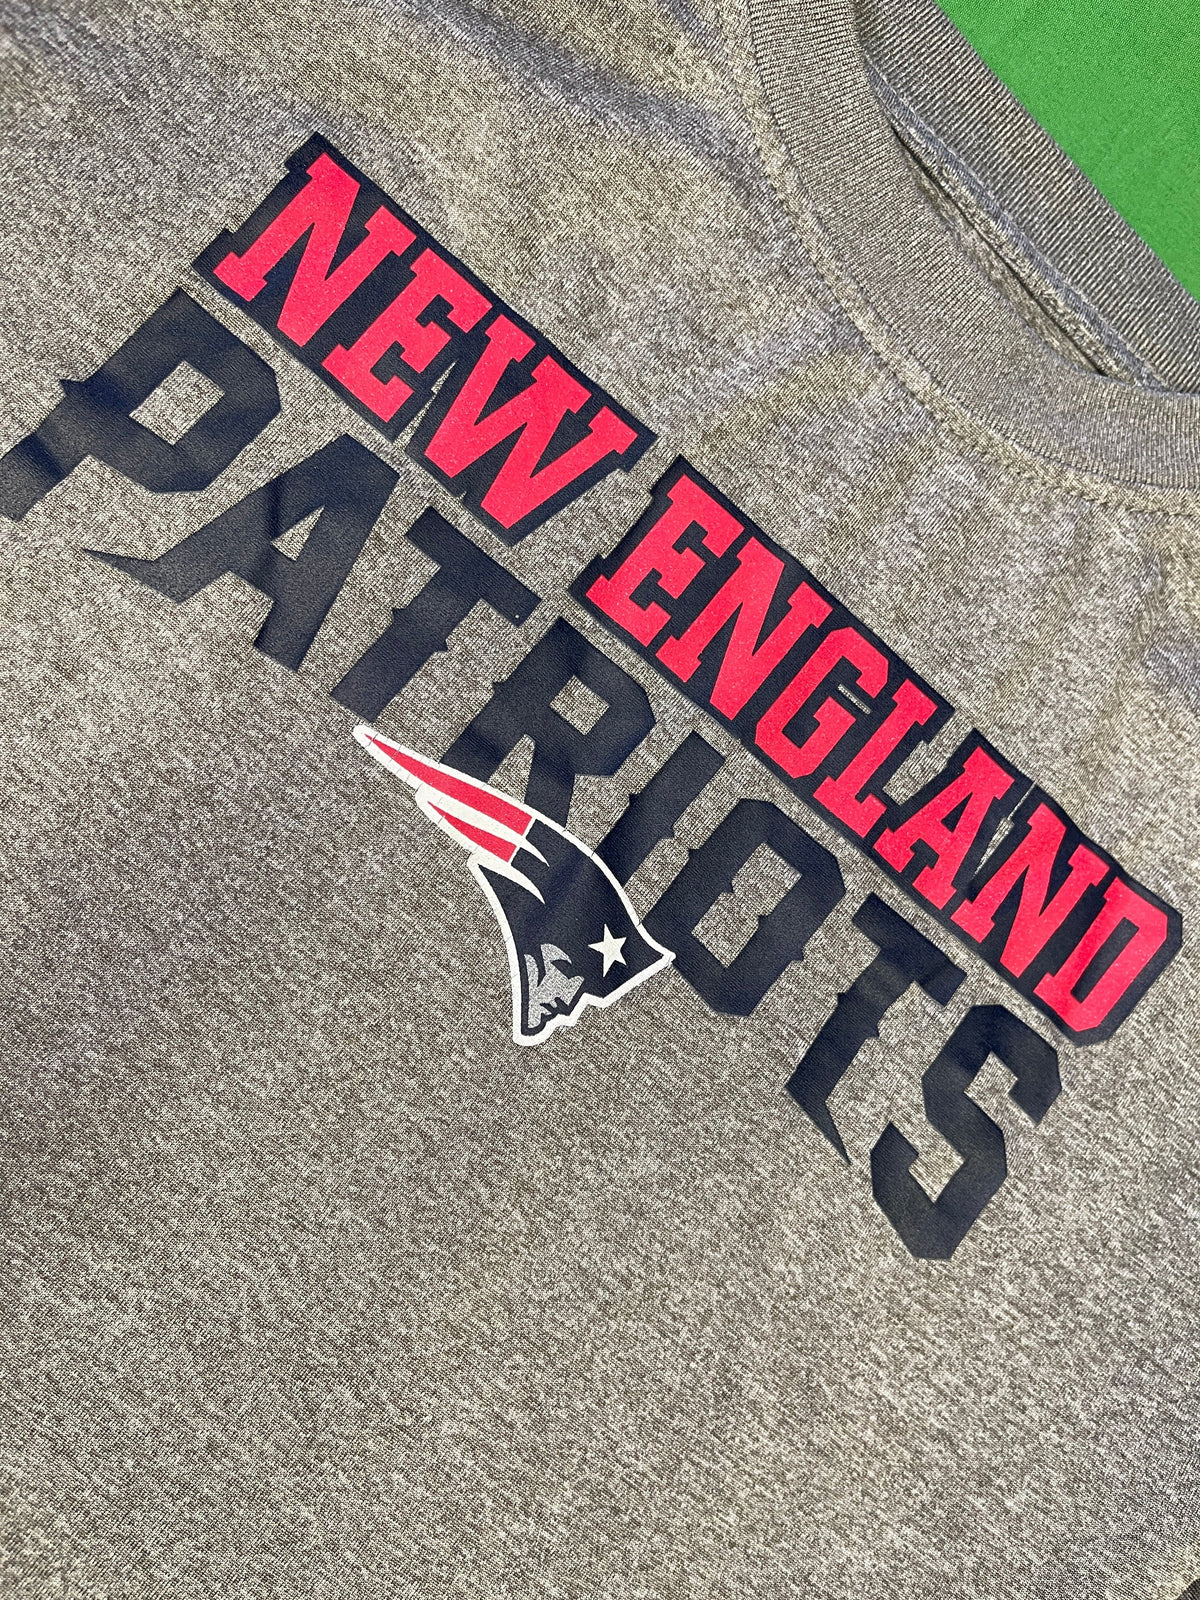 NFL New England Patriots Heathered Grey T-Shirt Youth Small 6-7